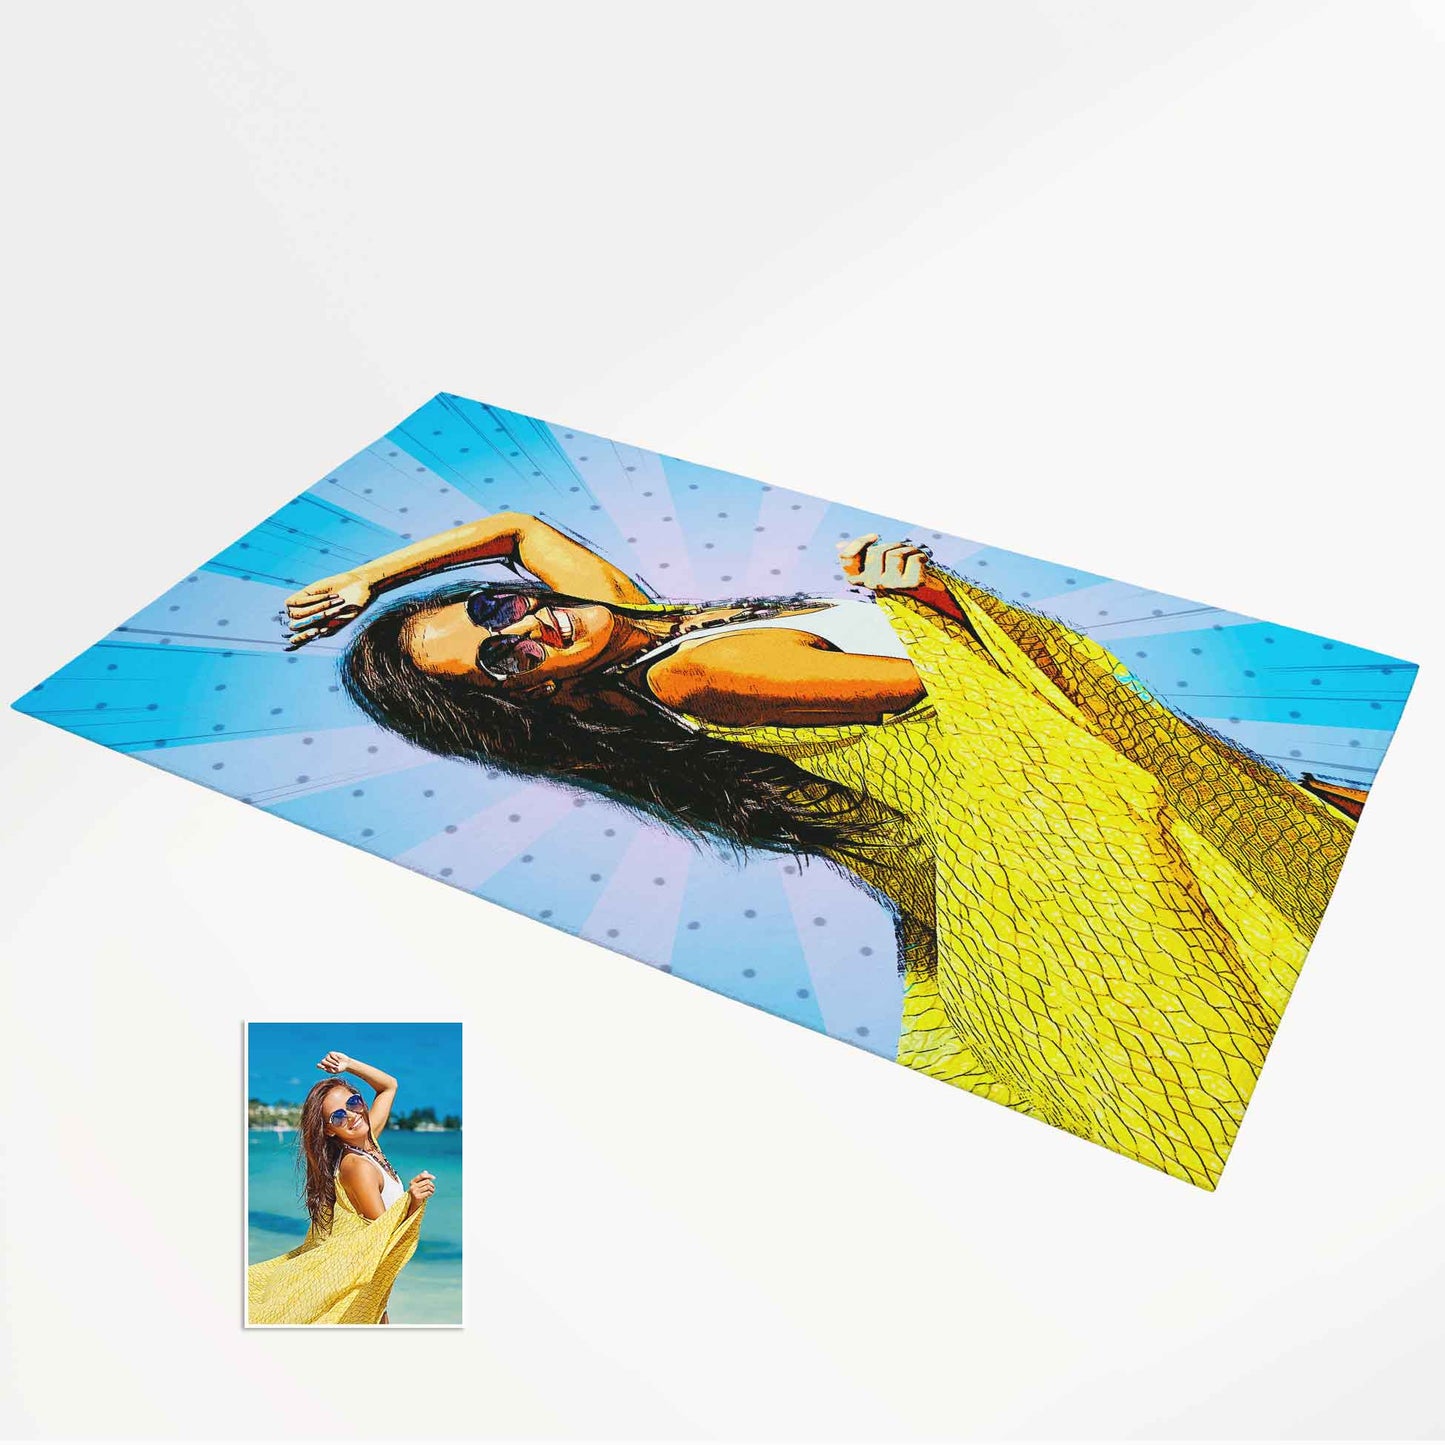 Bring back the laughter of yesteryears with our Cartoon Comics Photo Rug! Personalise it and relive the joy. Shop now